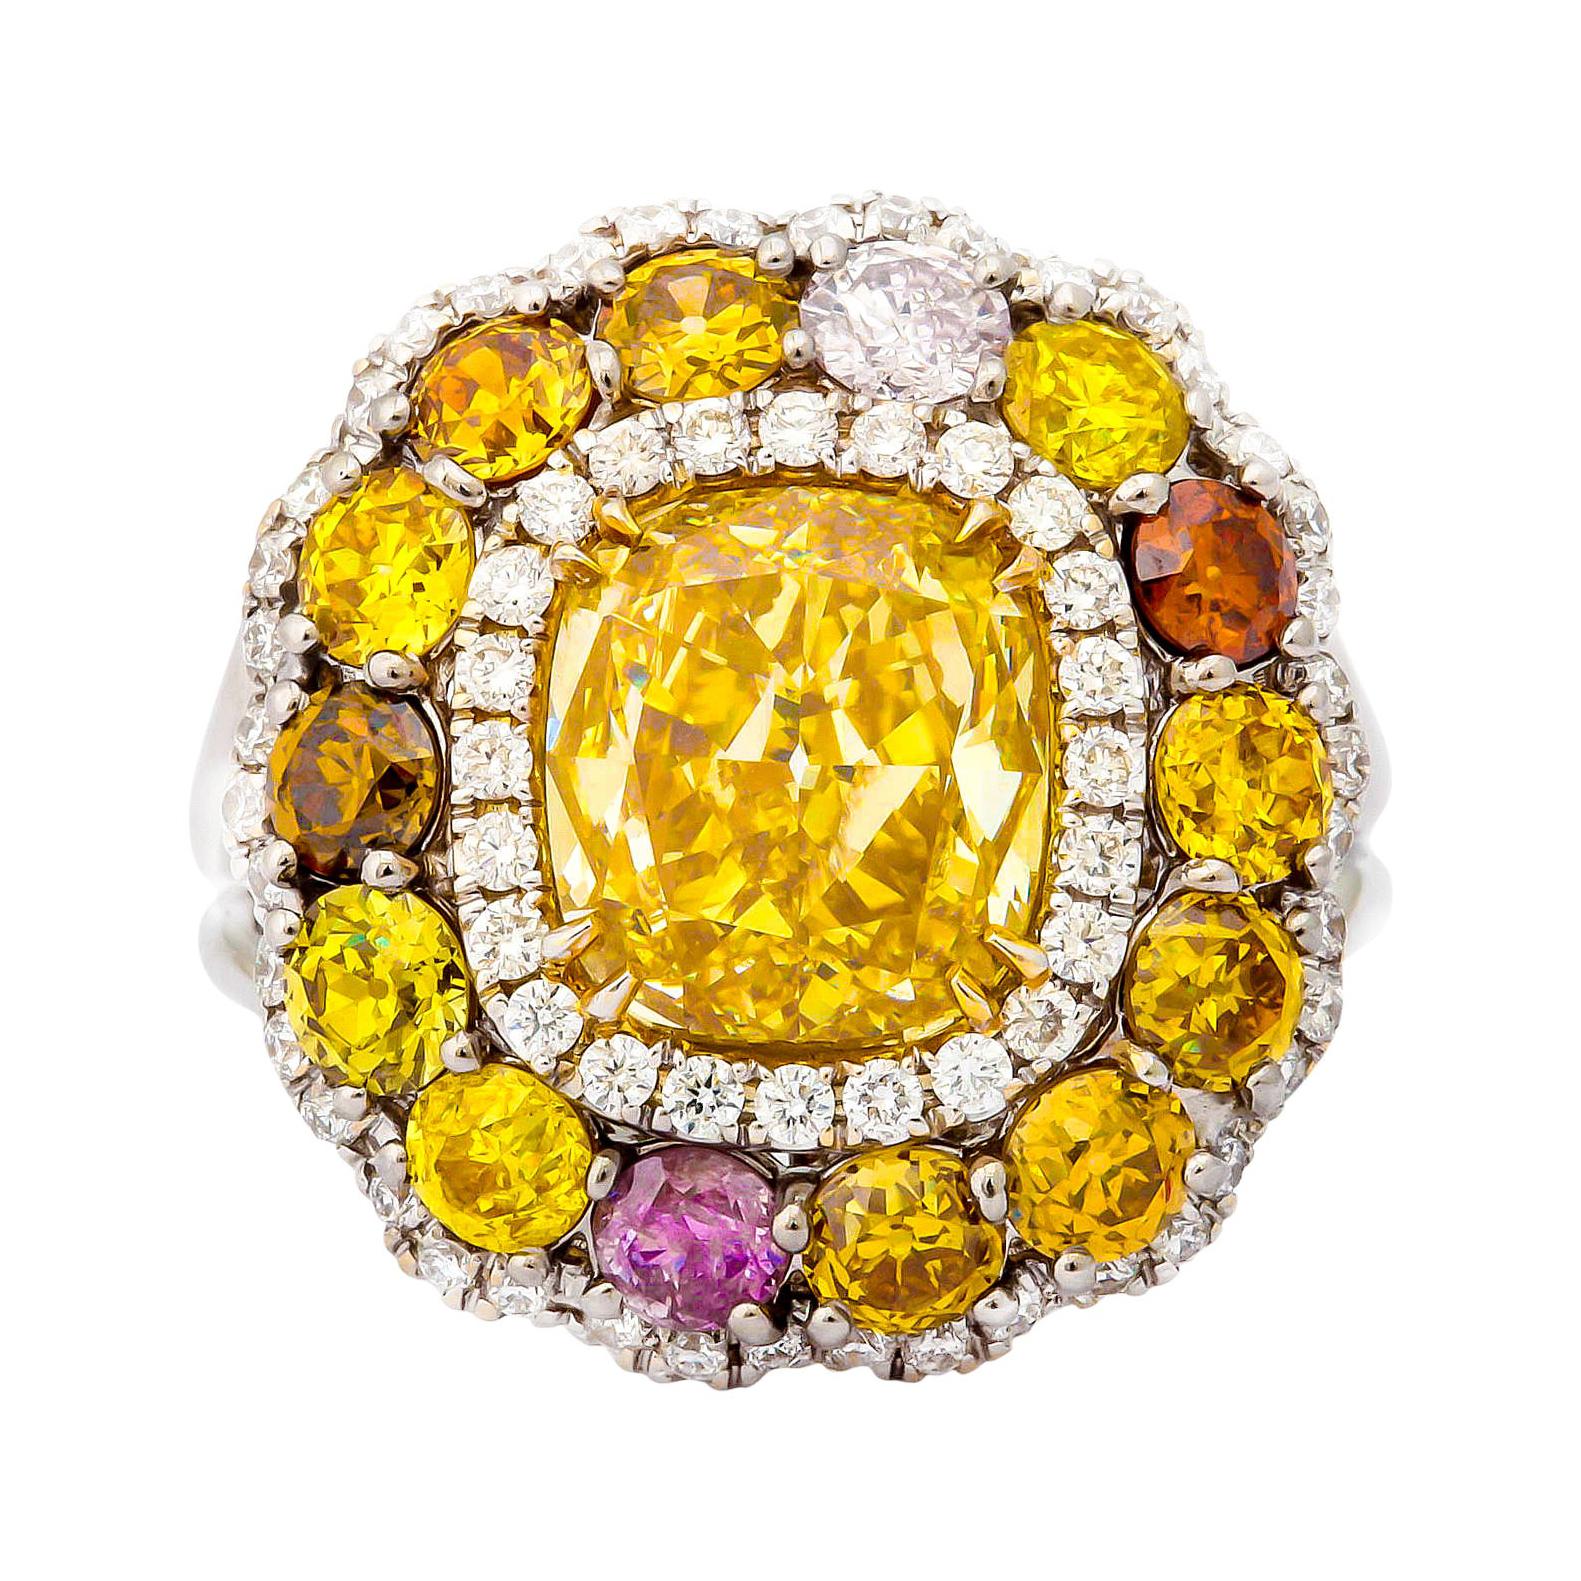 18KT White Gold Cushion Cut Diamond Ring with Fancy Yellow Brownish Center